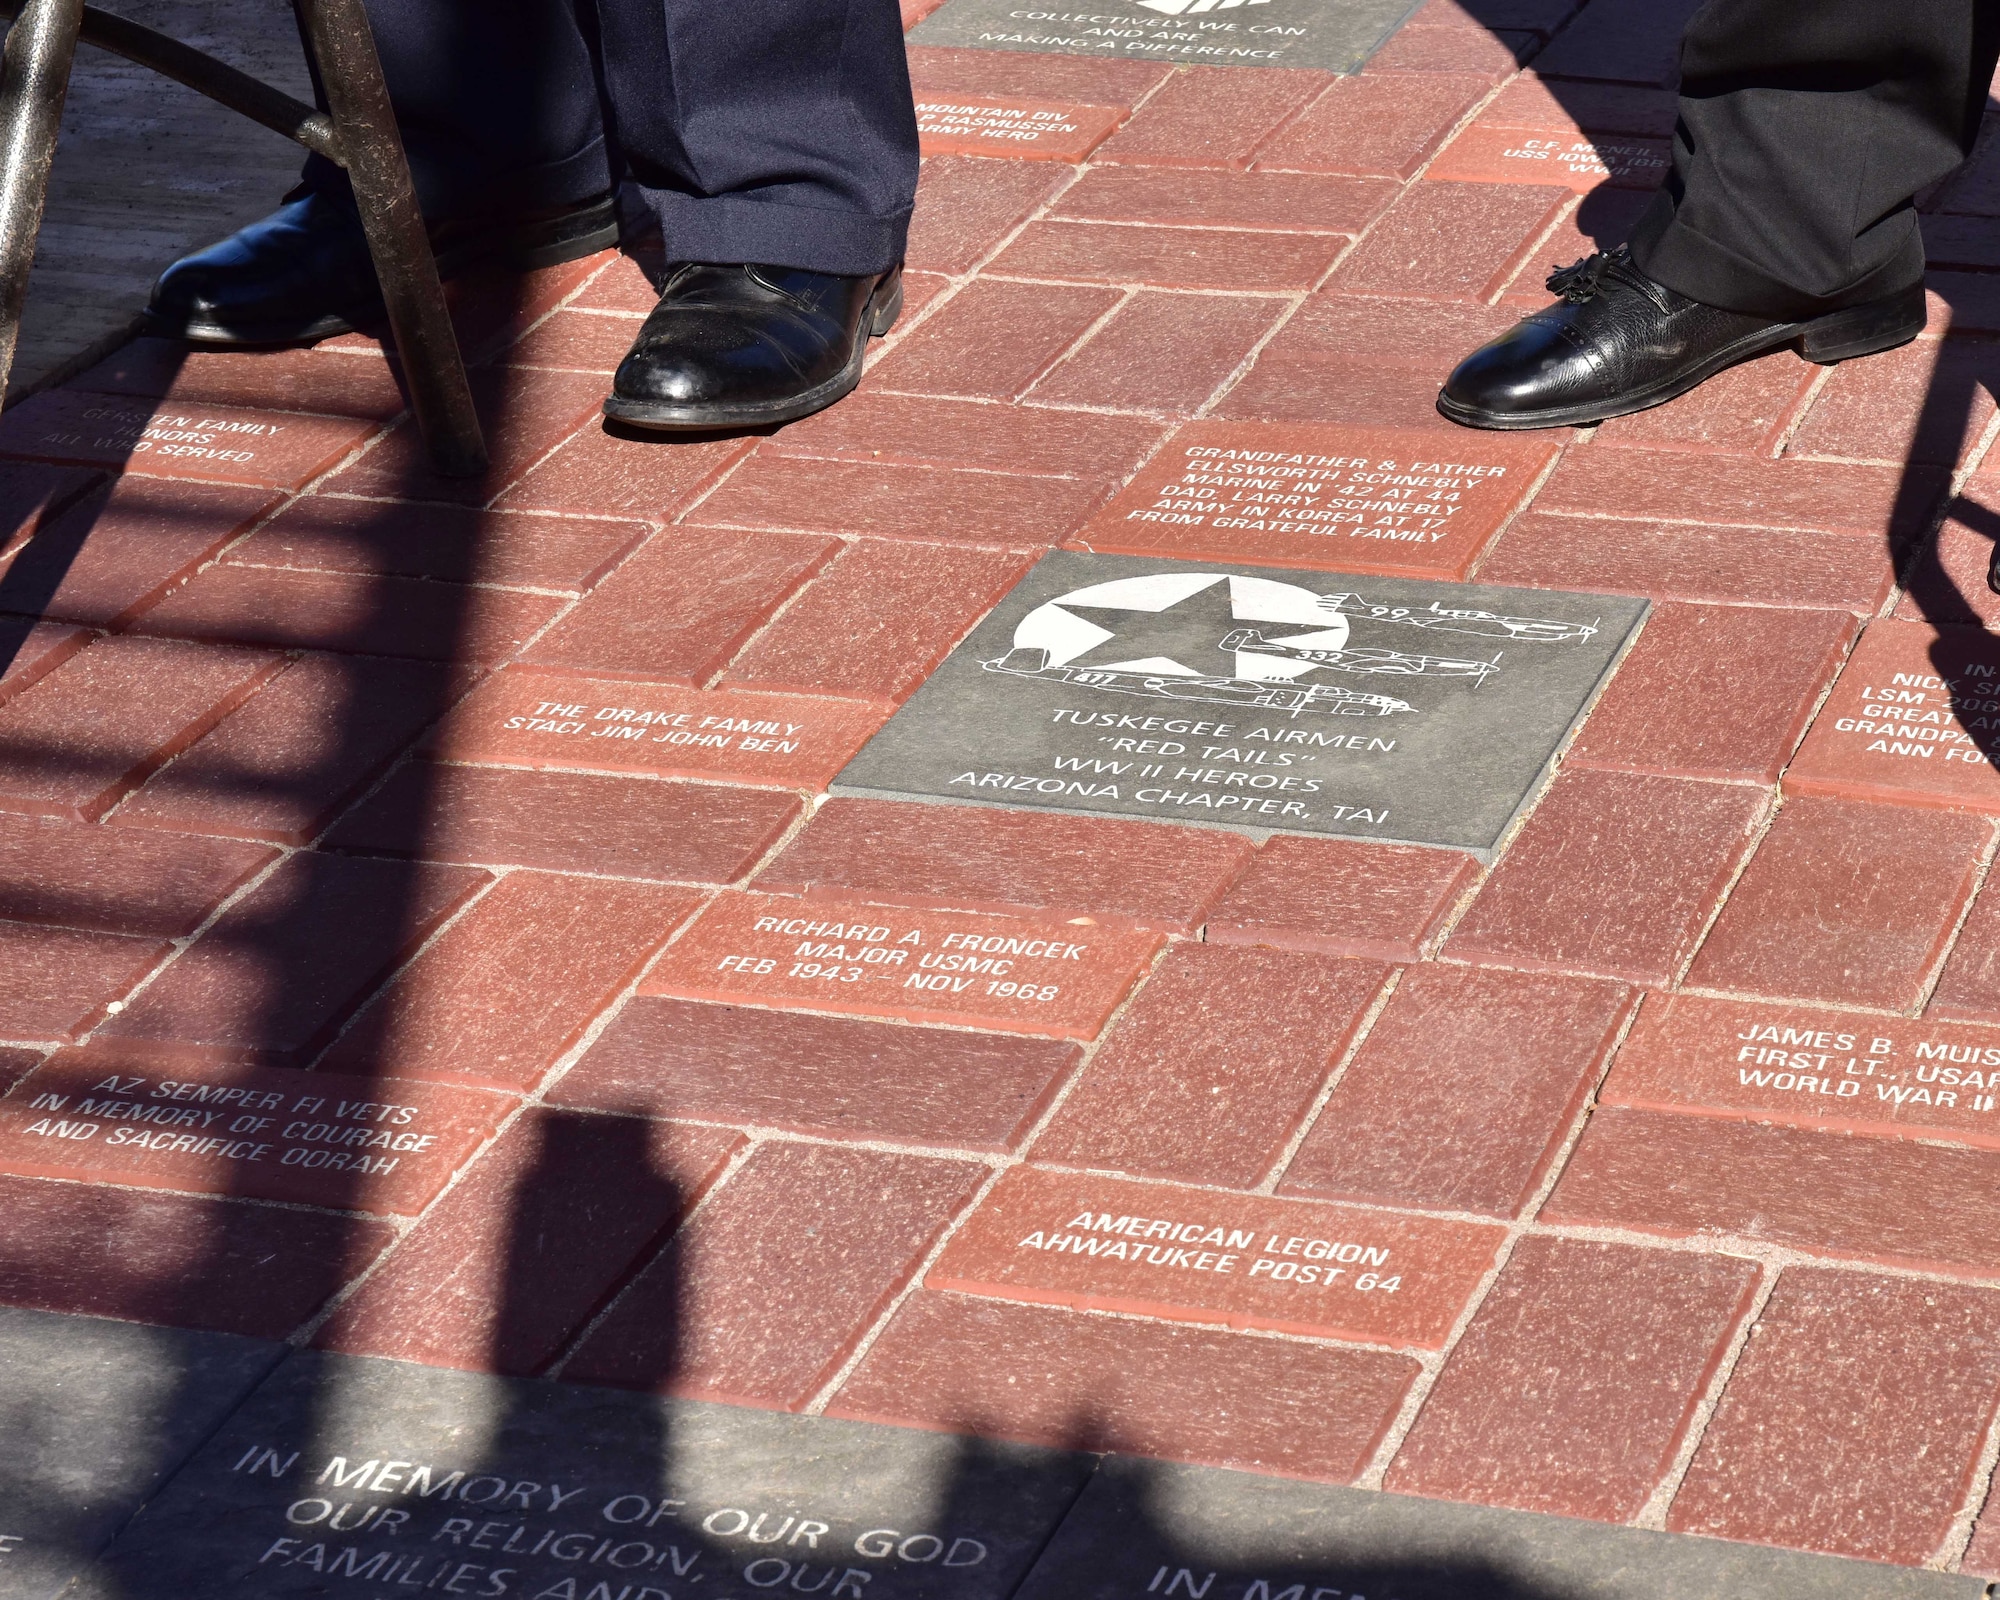 The Archer-Ragsdale Arizona Chapter, Tuskegee Airmen, Inc., unveil a red tail granite paver Nov. 11 during a ceremony honoring the Tuskegee Airmen experience at the Wesley Bolin Plaza, Phoenix, Arizona. (U.S. Air Force photo by Tech. Sgt. Louis Vega Jr.)